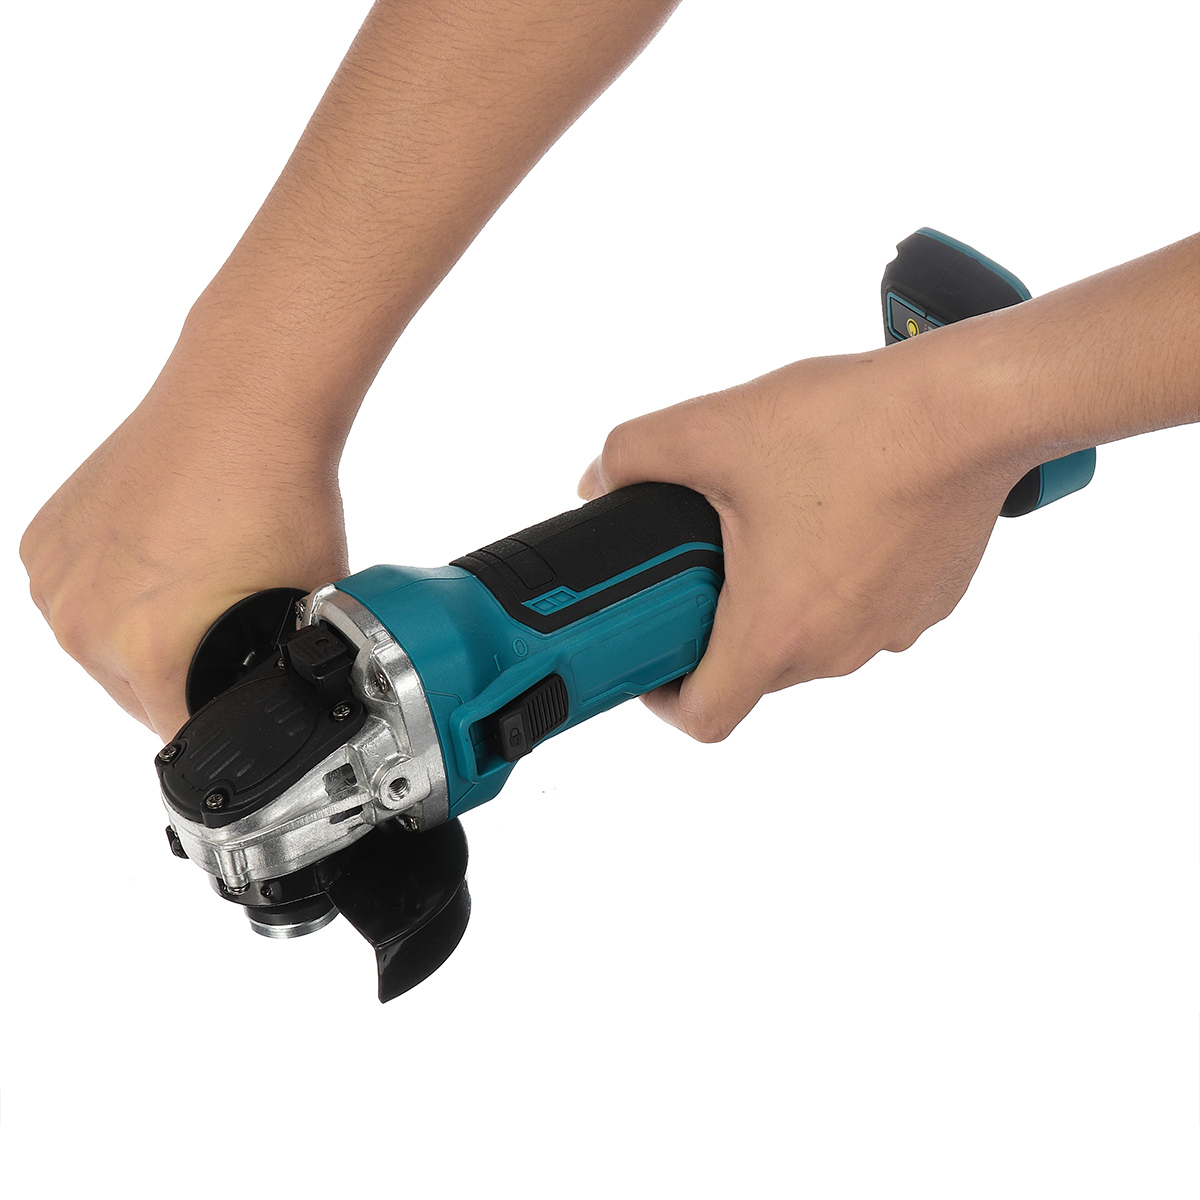 Drillpro-Electric-Brushless-Cordless-Angle-Grinder-M10-125mm-Cut-for-Makiita-18V-Battery-1791879-9